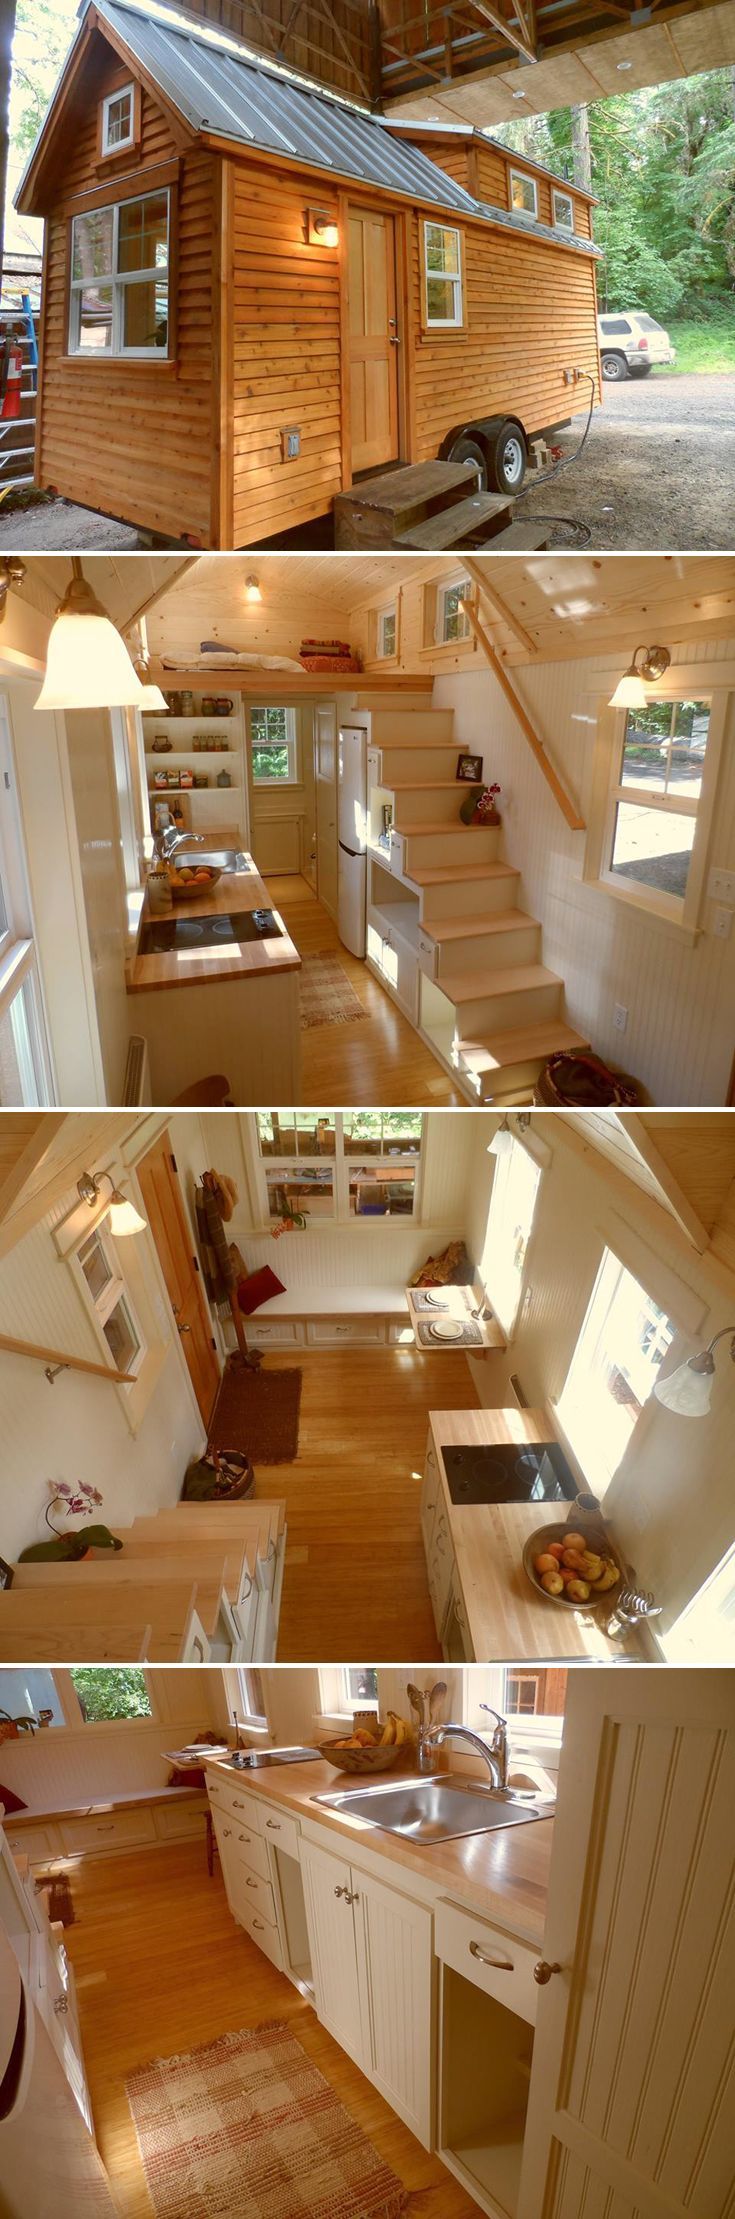 This customized 22 Ynez tiny house features tansu storage stairs with maple t